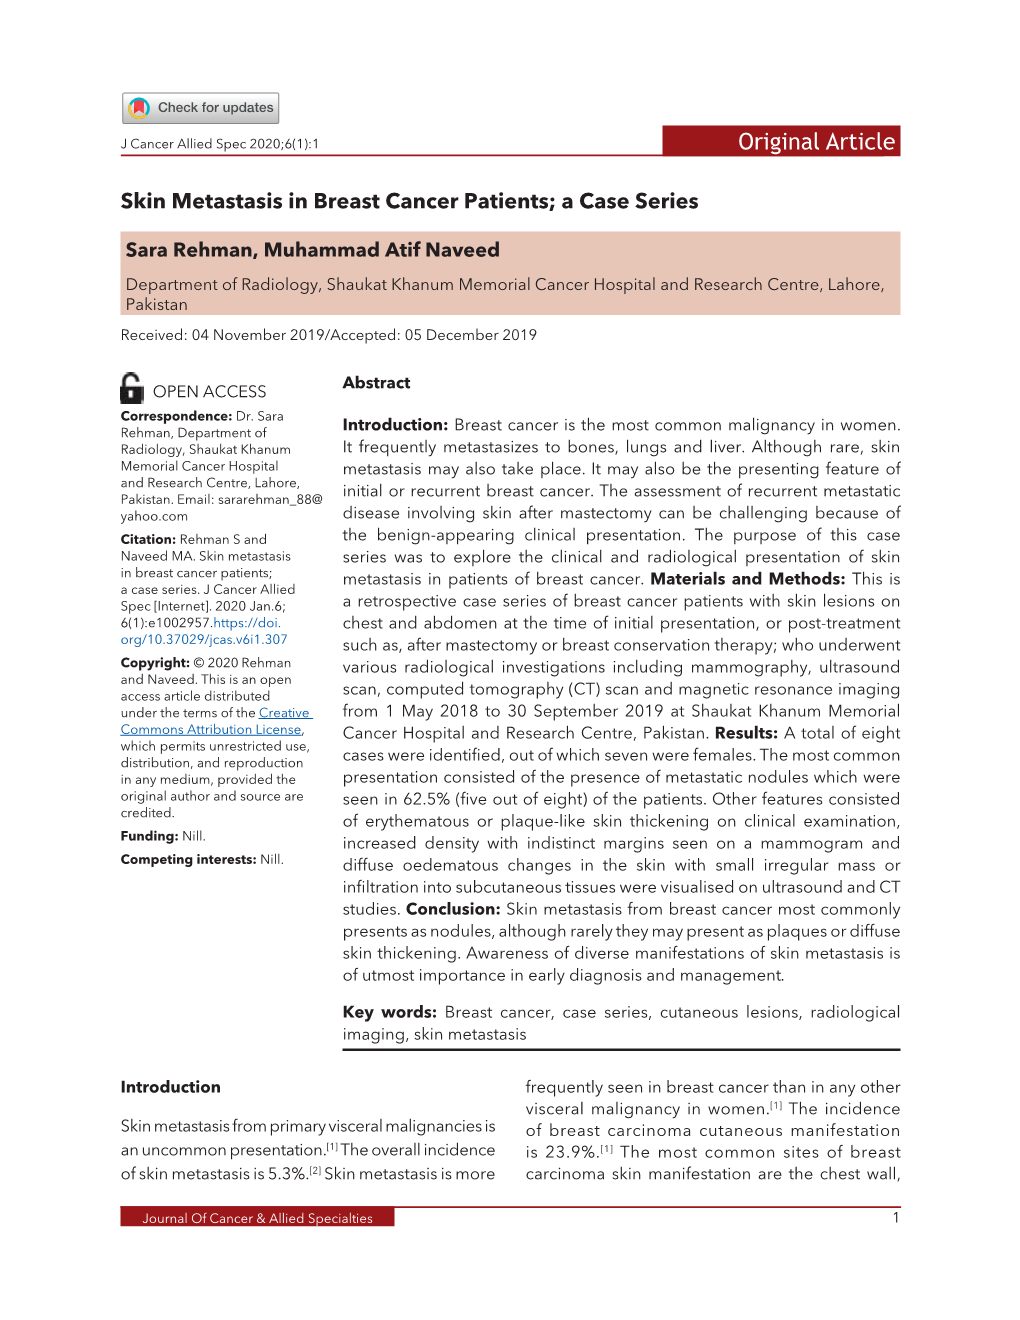 Skin Metastasis in Breast Cancer Patients; a Case Series. J Cancer